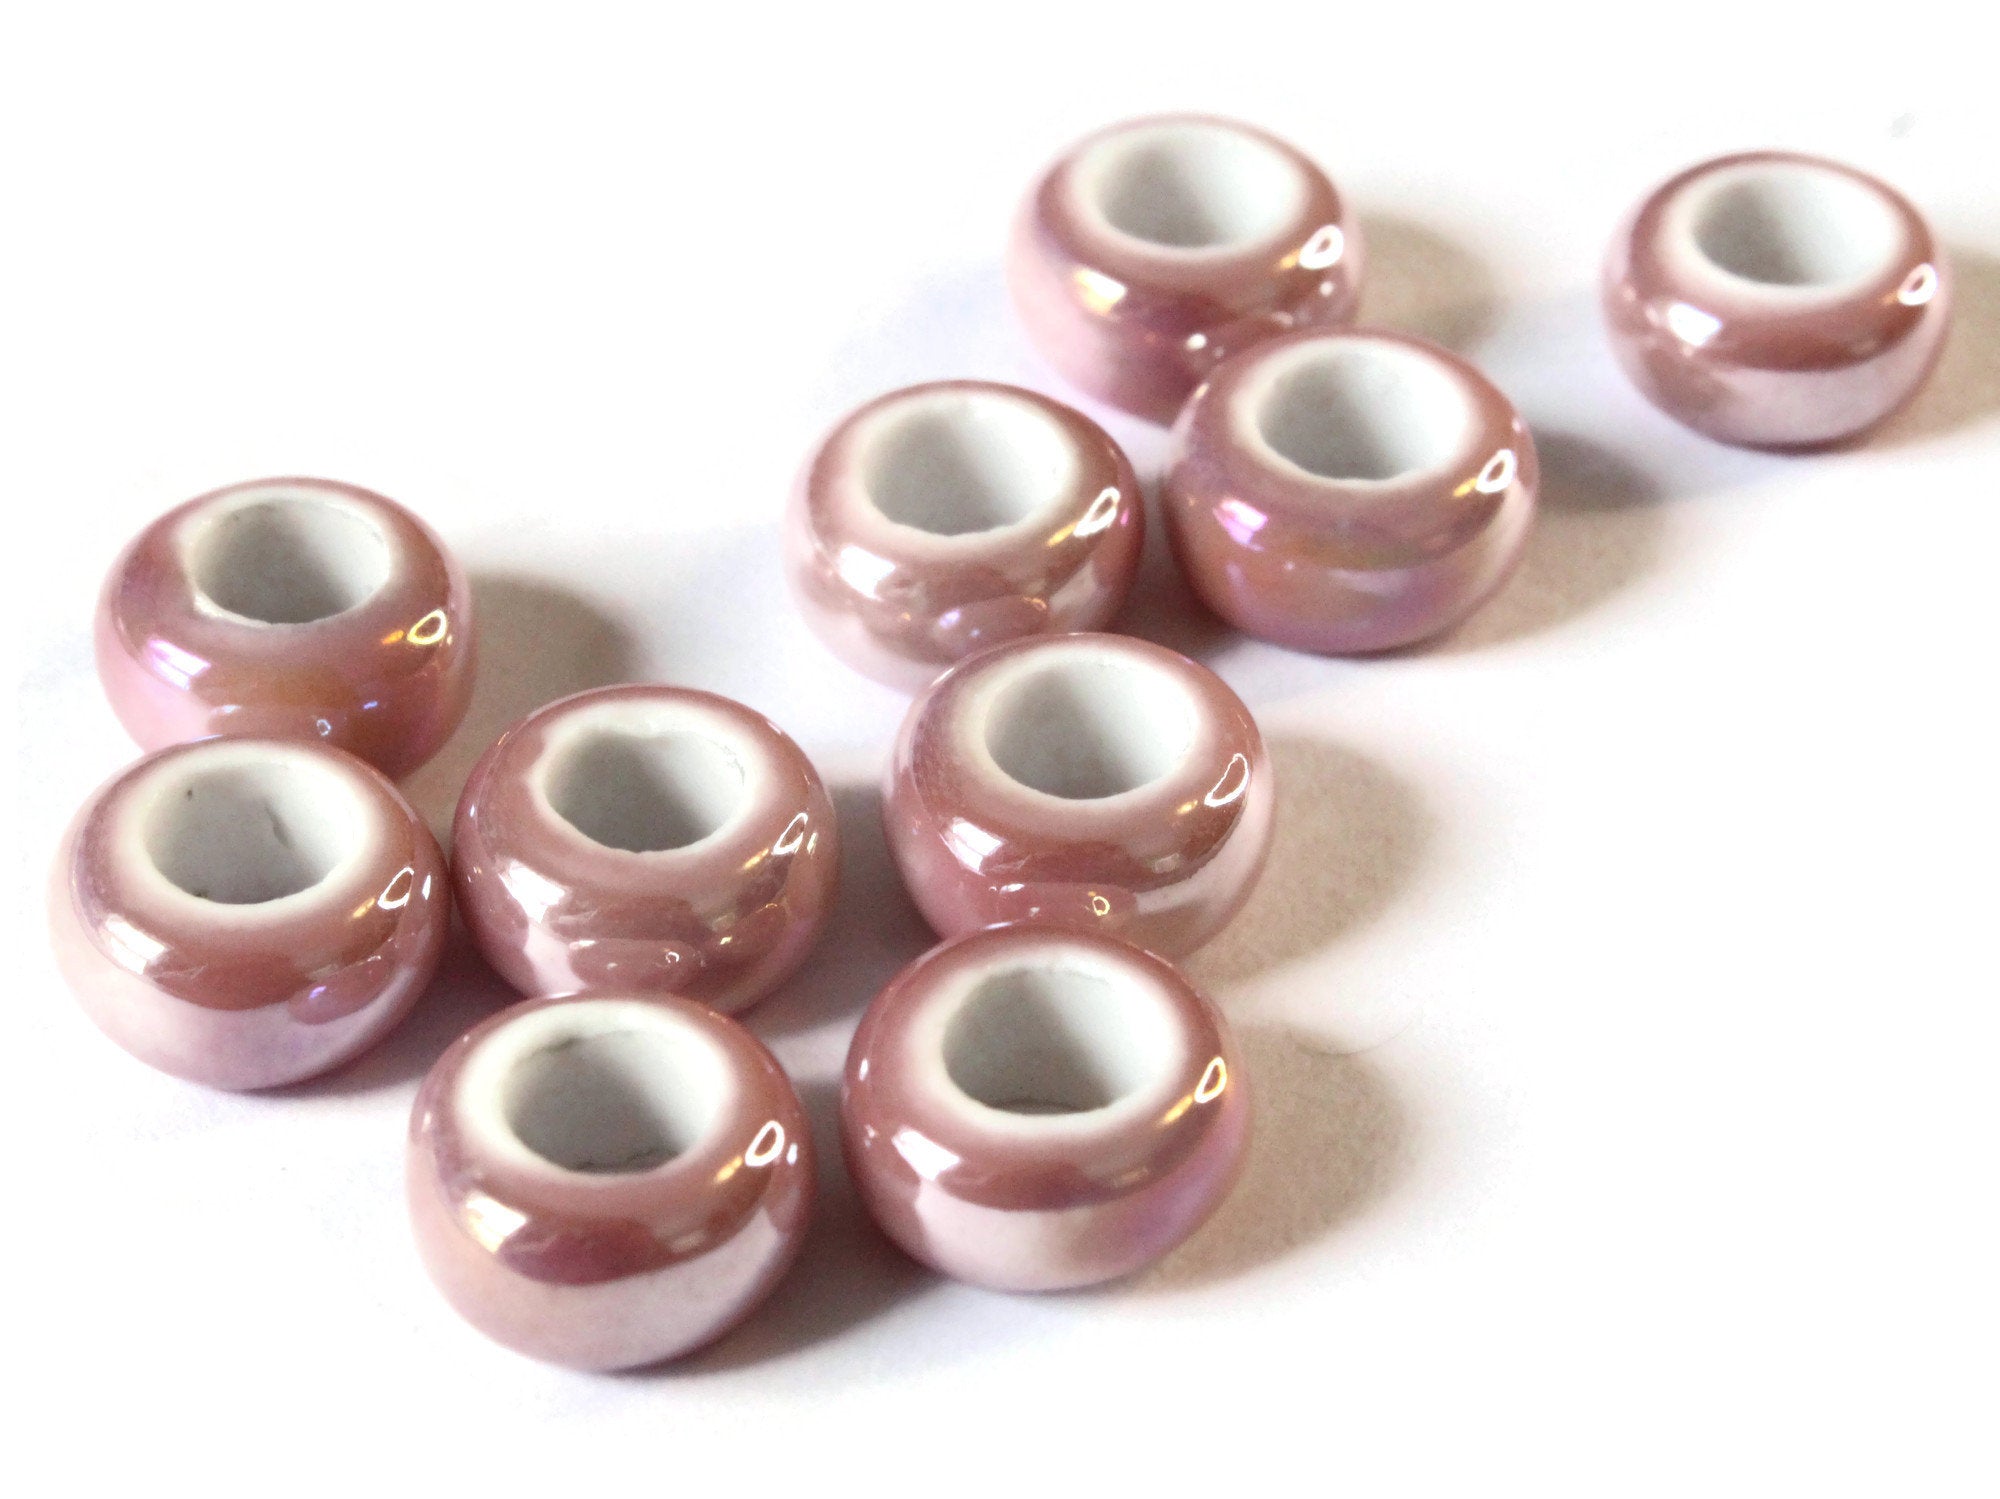 10 13mm Pink Porcelain Rondelle Beads - Large Hole Beads